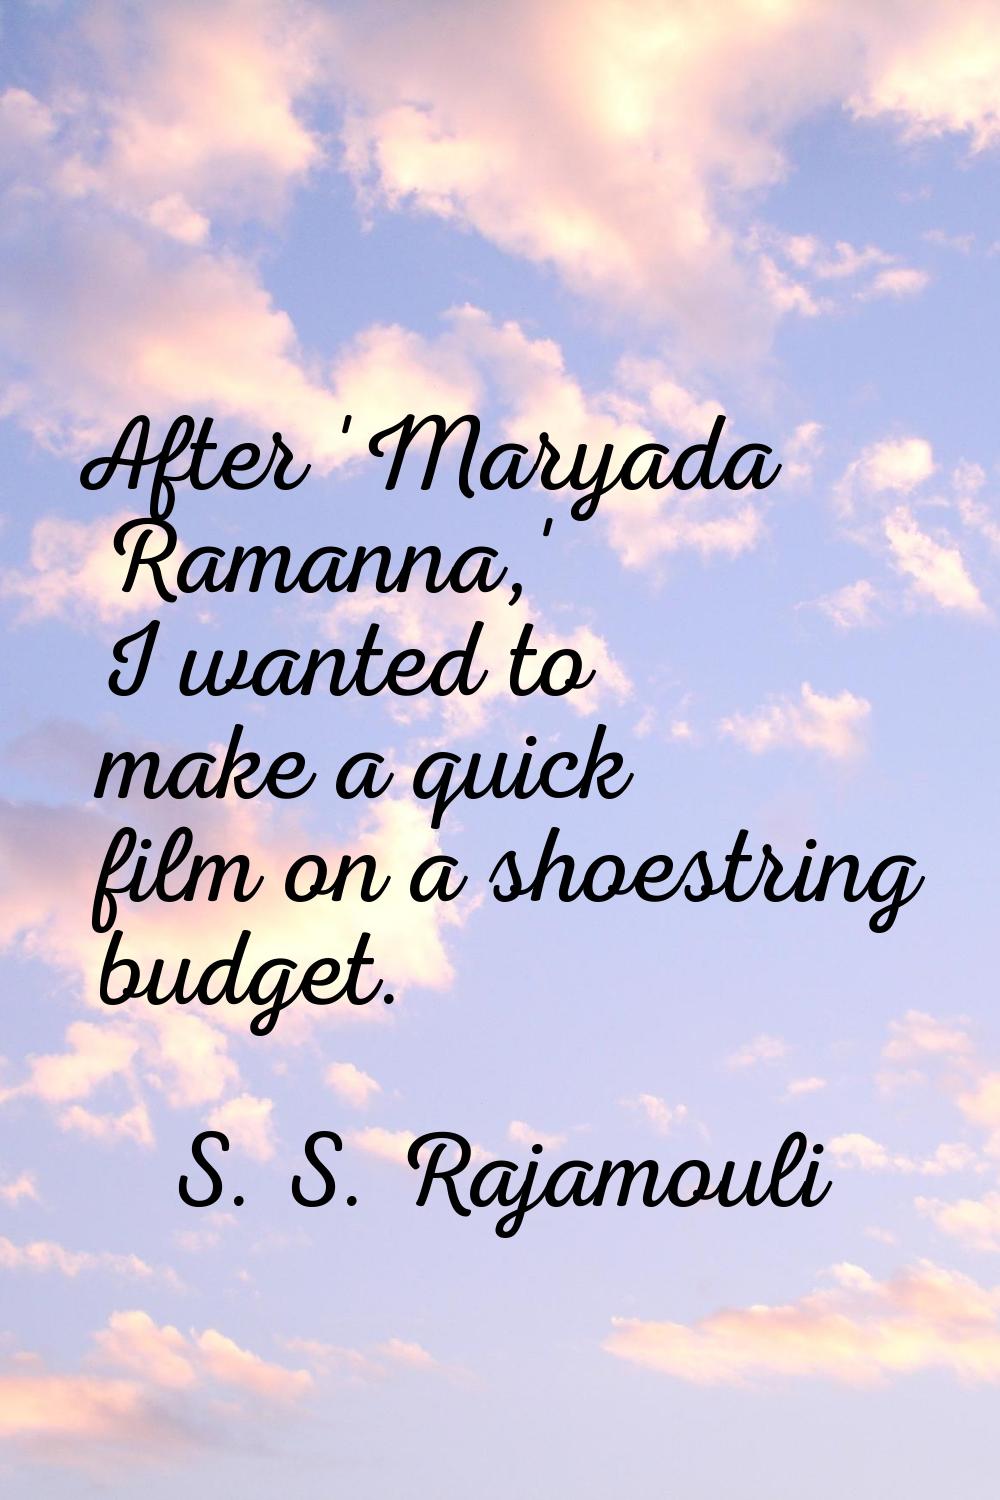 After 'Maryada Ramanna,' I wanted to make a quick film on a shoestring budget.